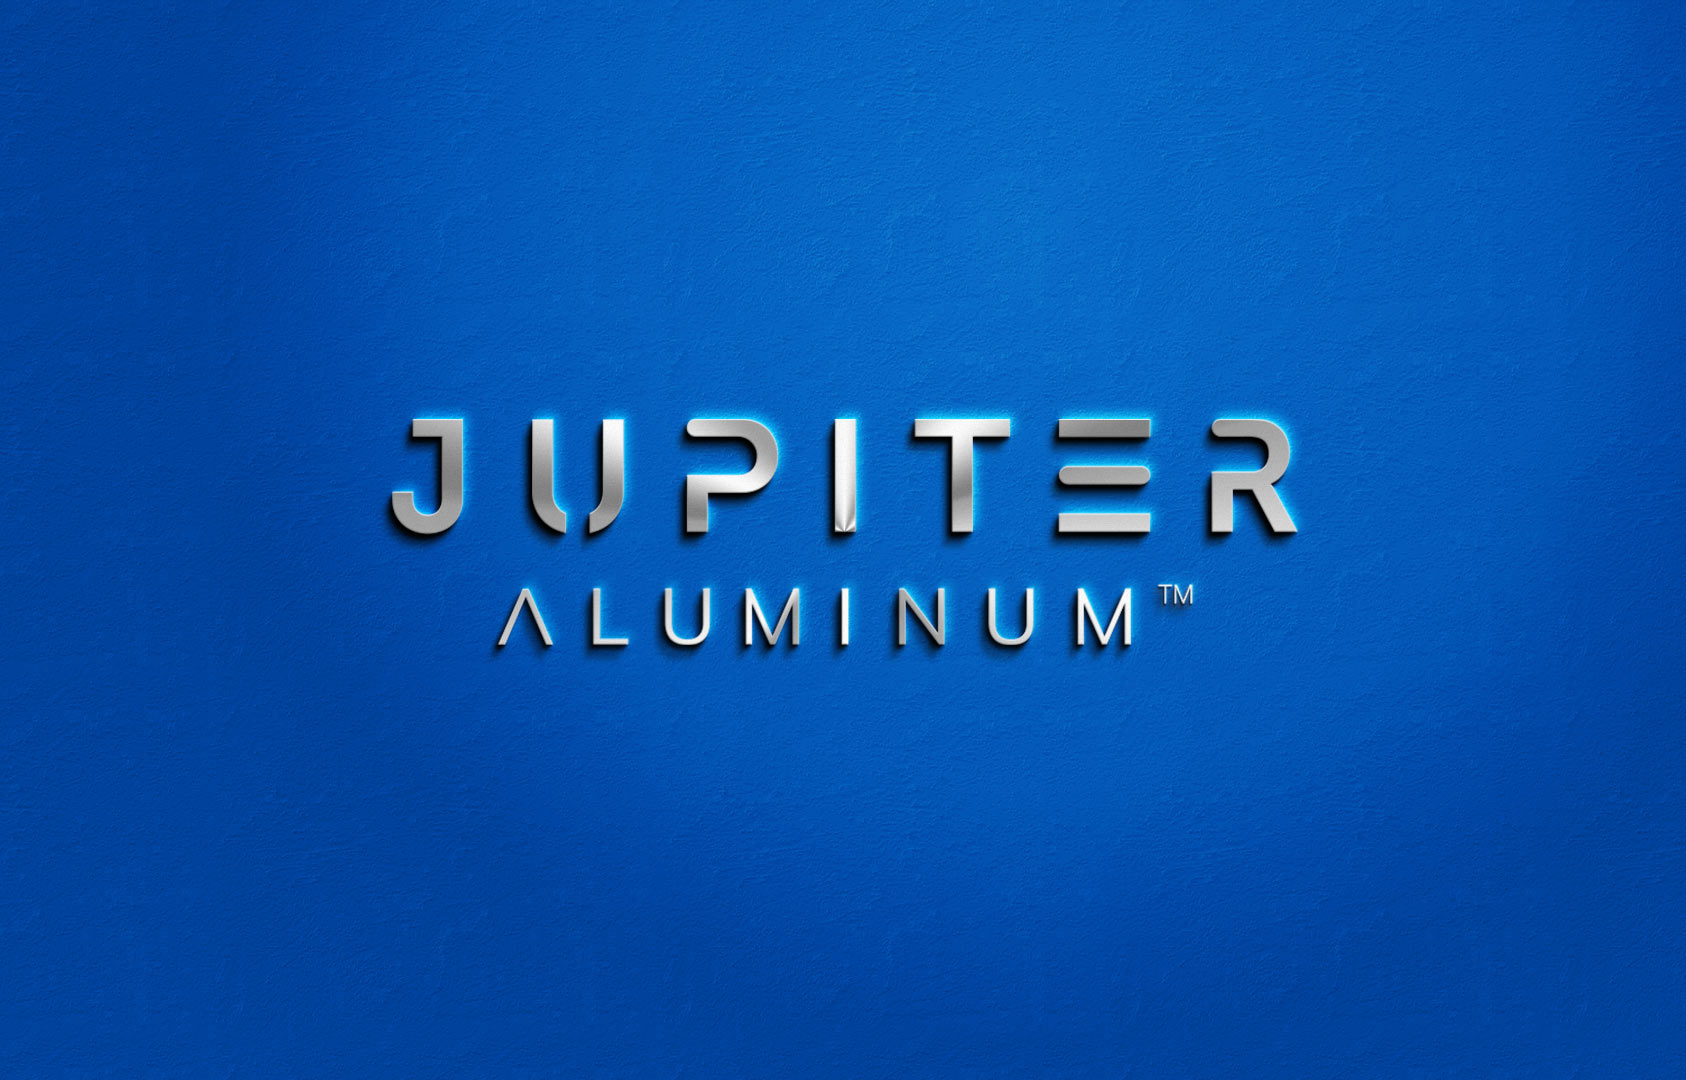 An aluminum company logo with a metal effect on a blue background.